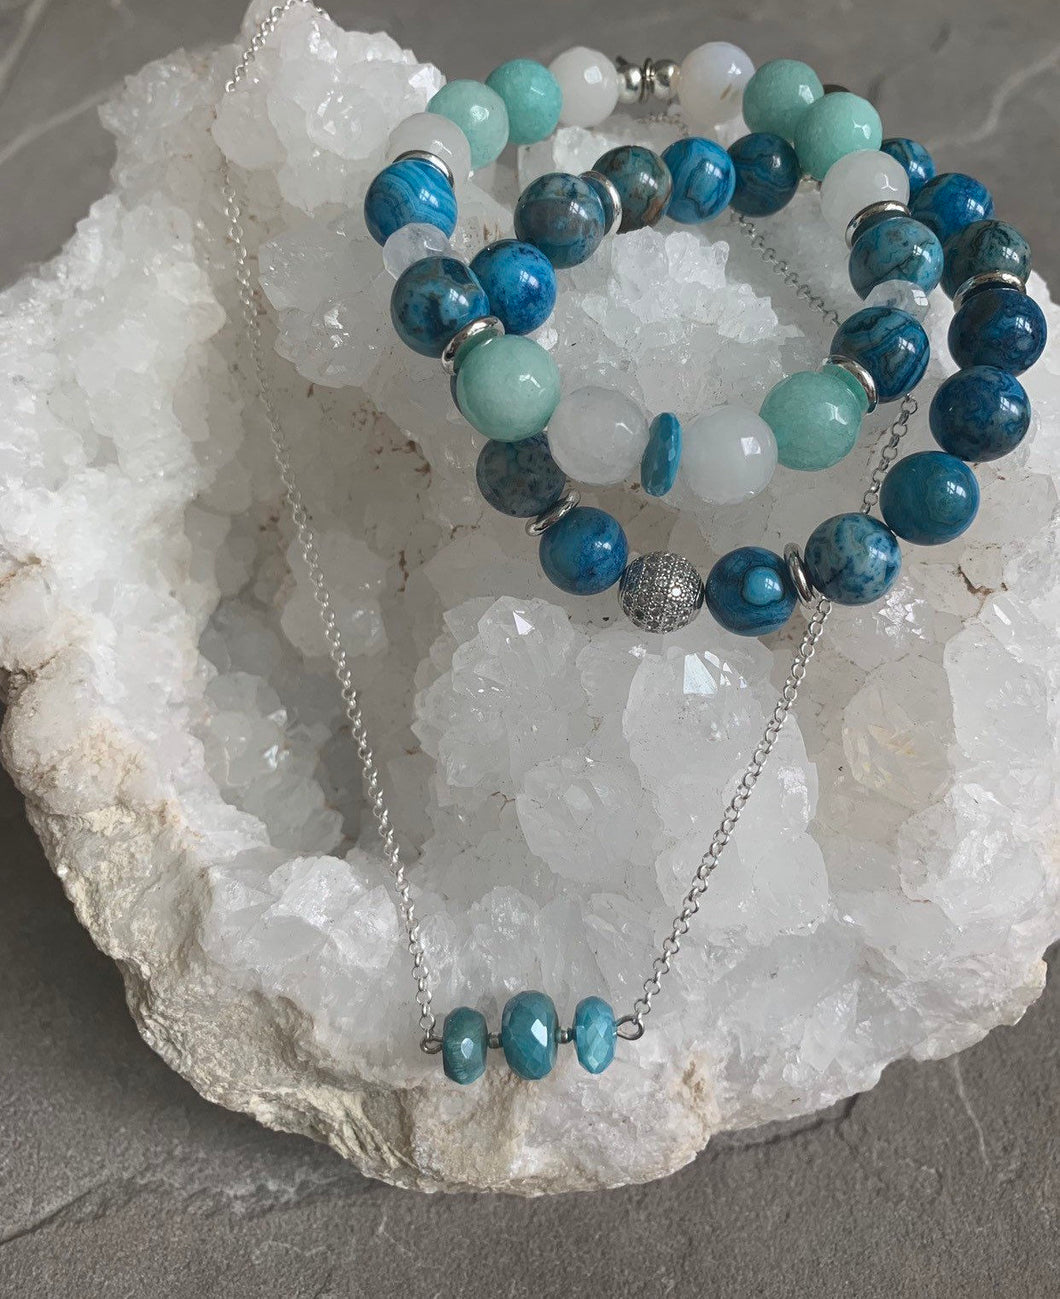 Mystical blue moonstone and crazy lace agate necklace and bracelet set